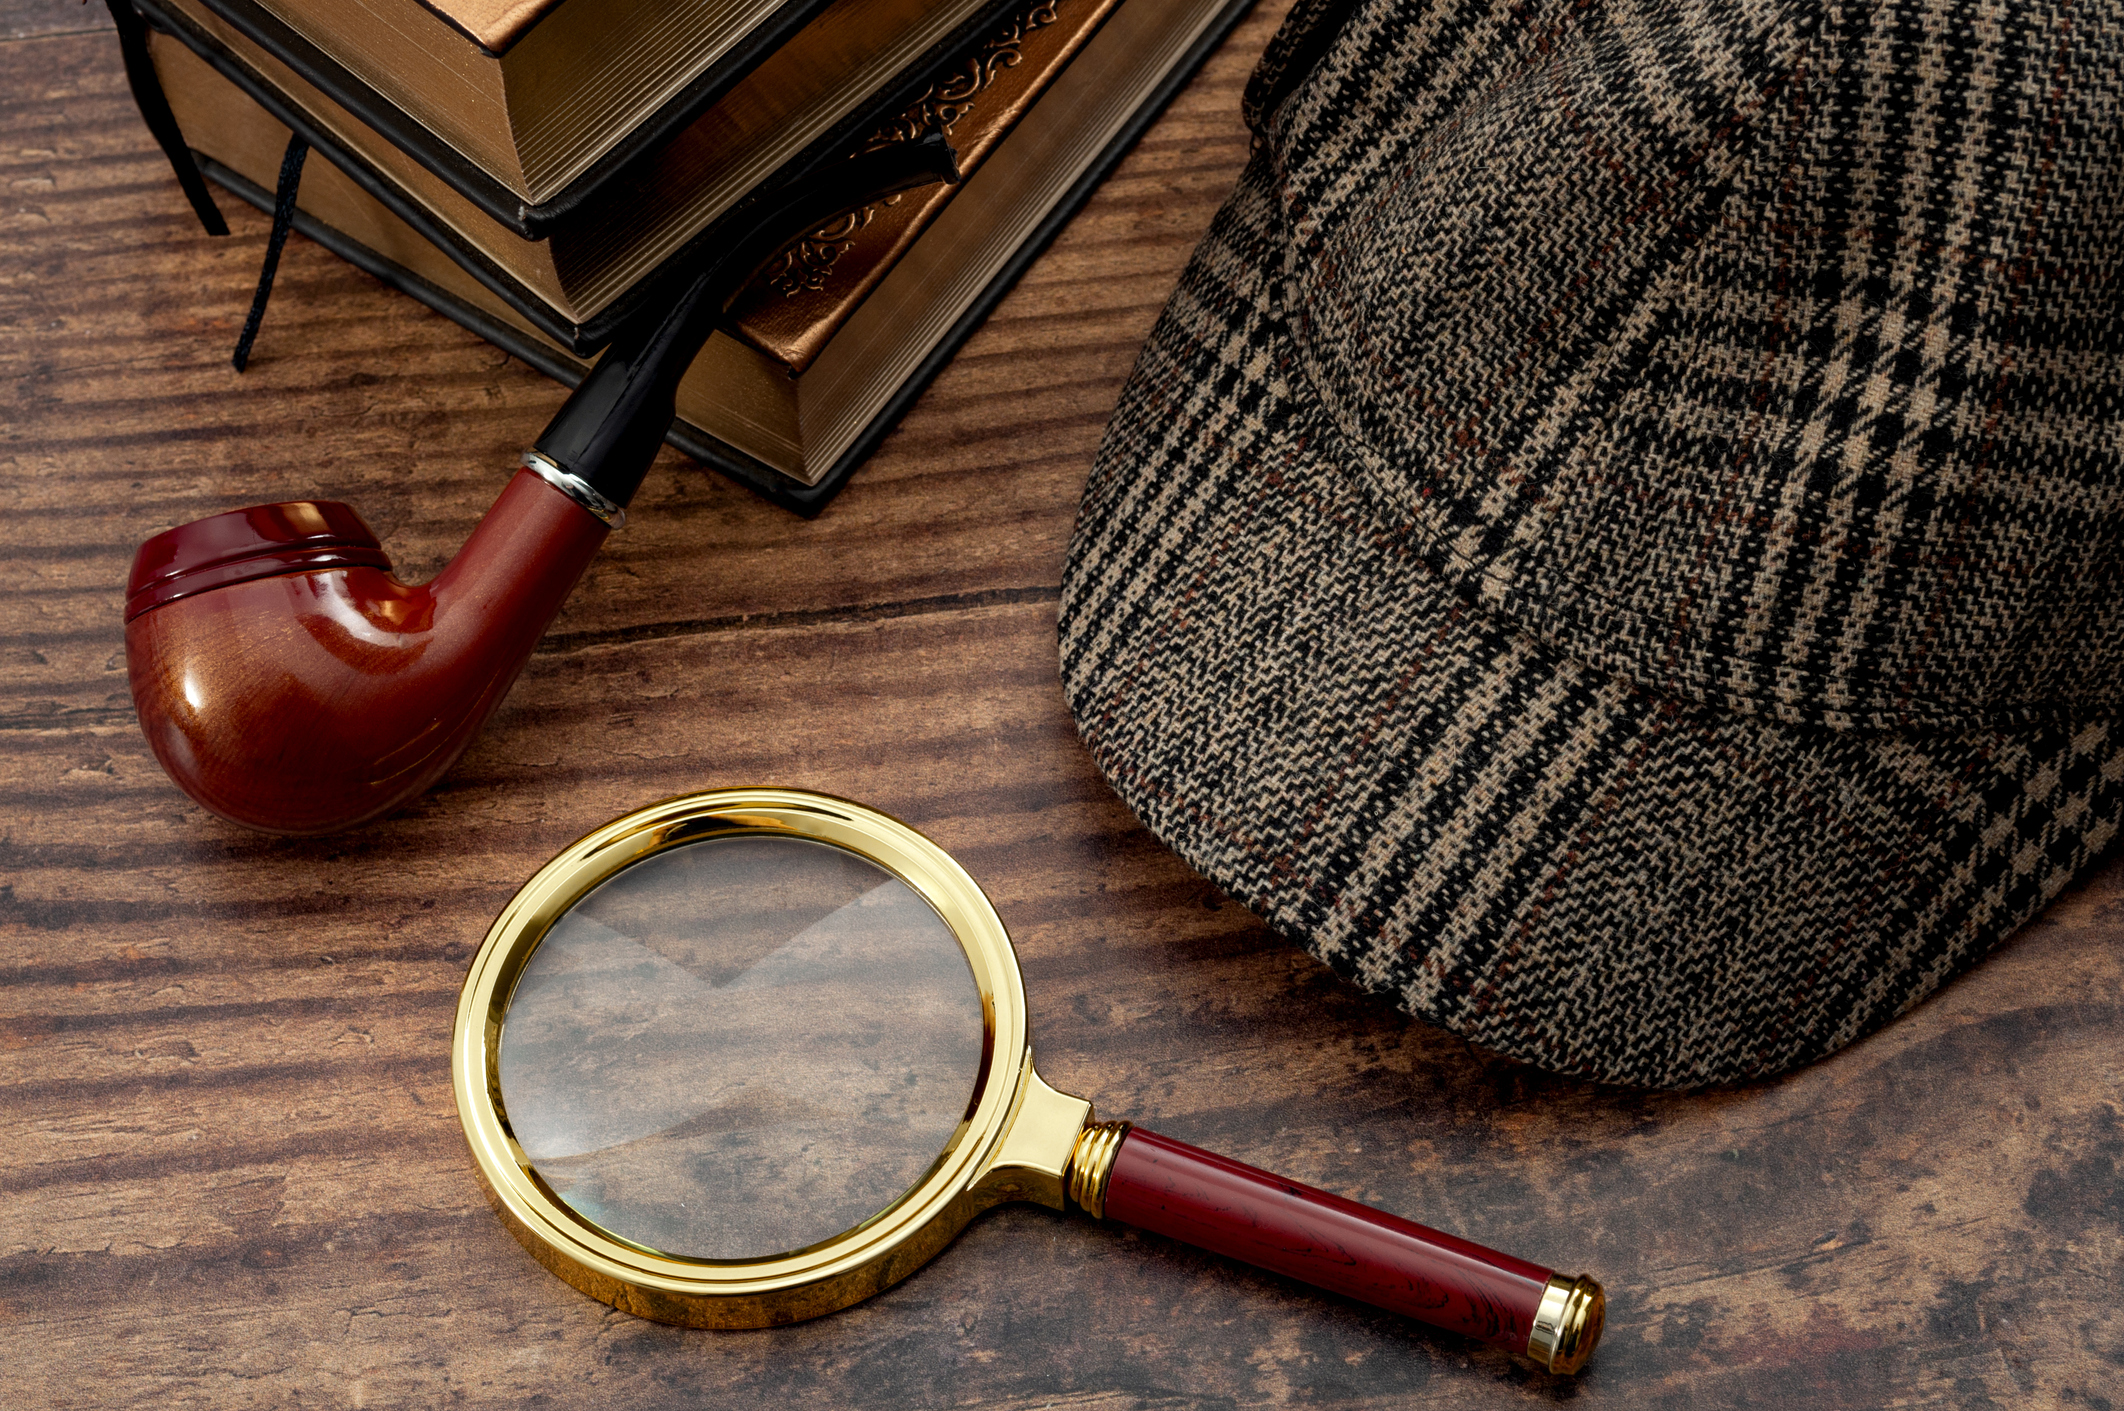 If detective stories are your thing, point your magnifying glass at the Floyd Memorial Library Book Club